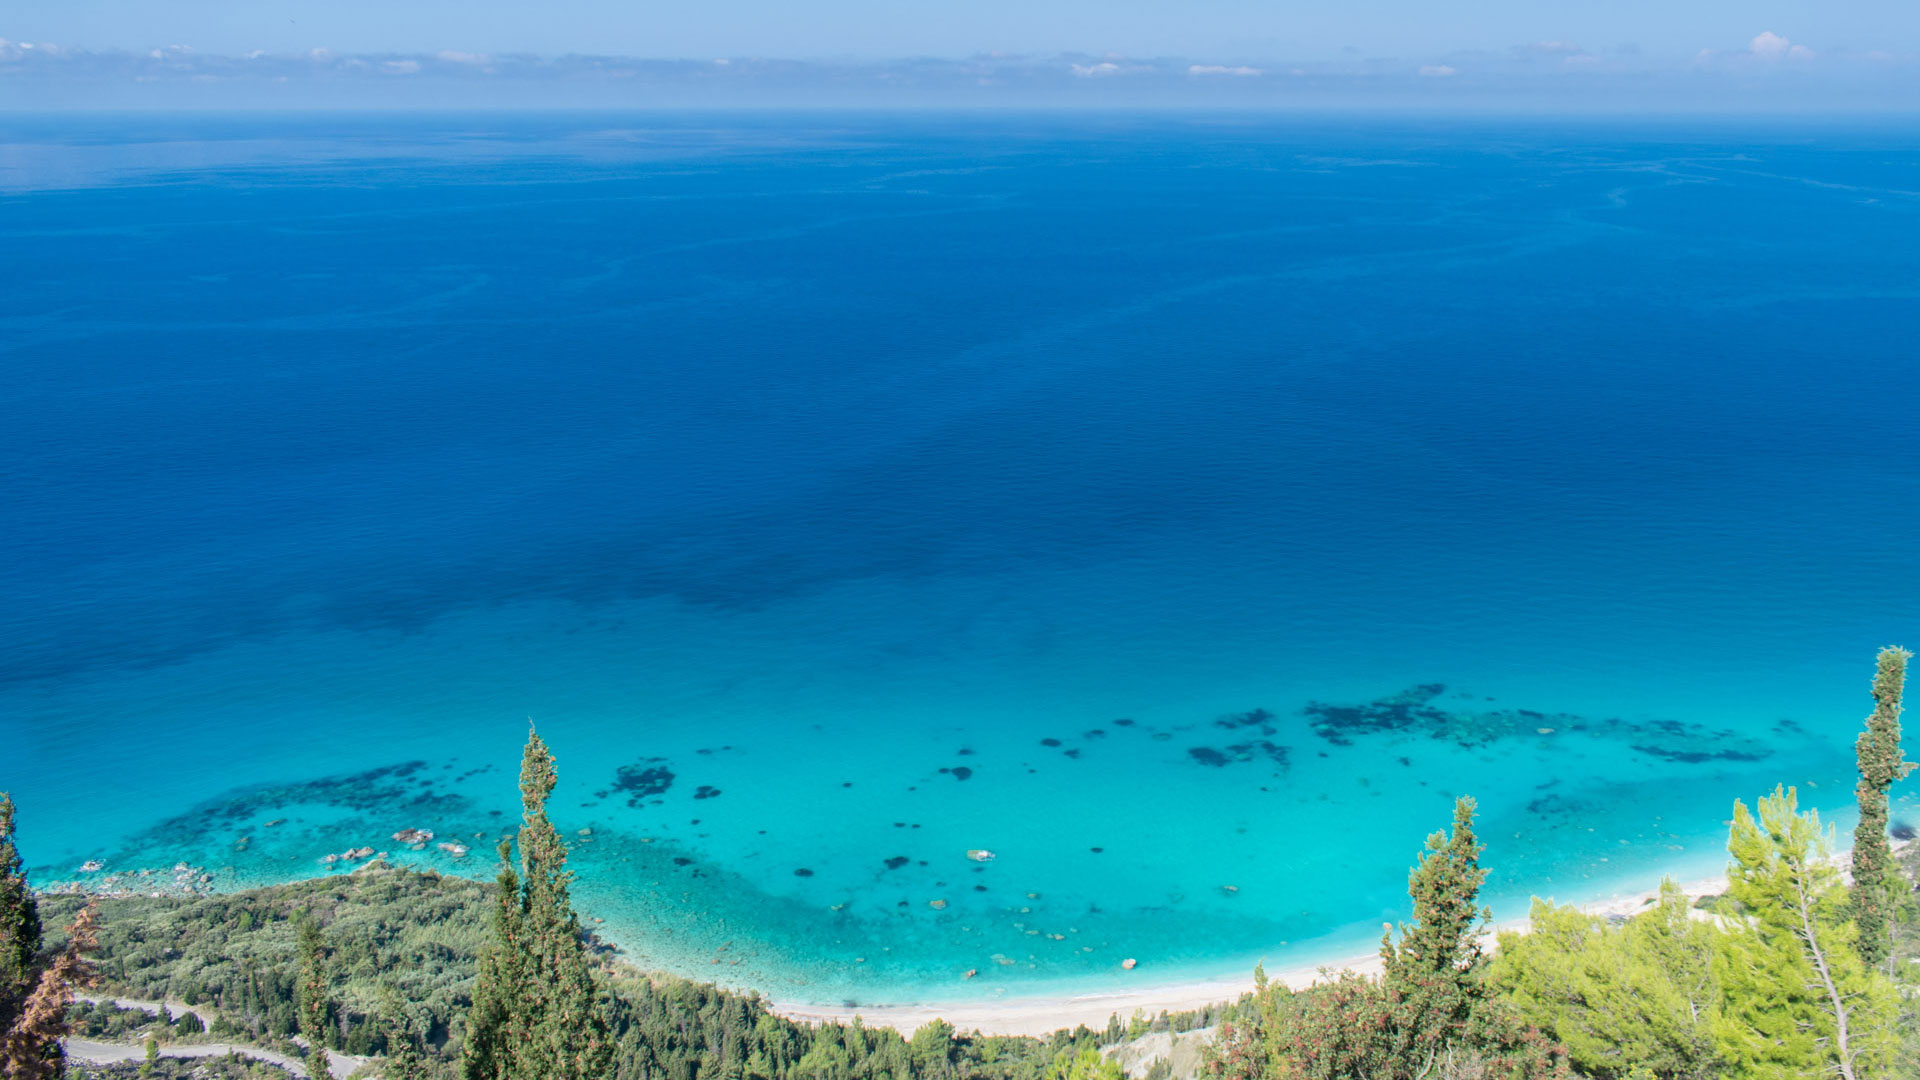 Overlooking view of the turquoise waters and verdant terrain of Lefkada Kalamitsi, illustrating the prime real estate and investment opportunities in the region.